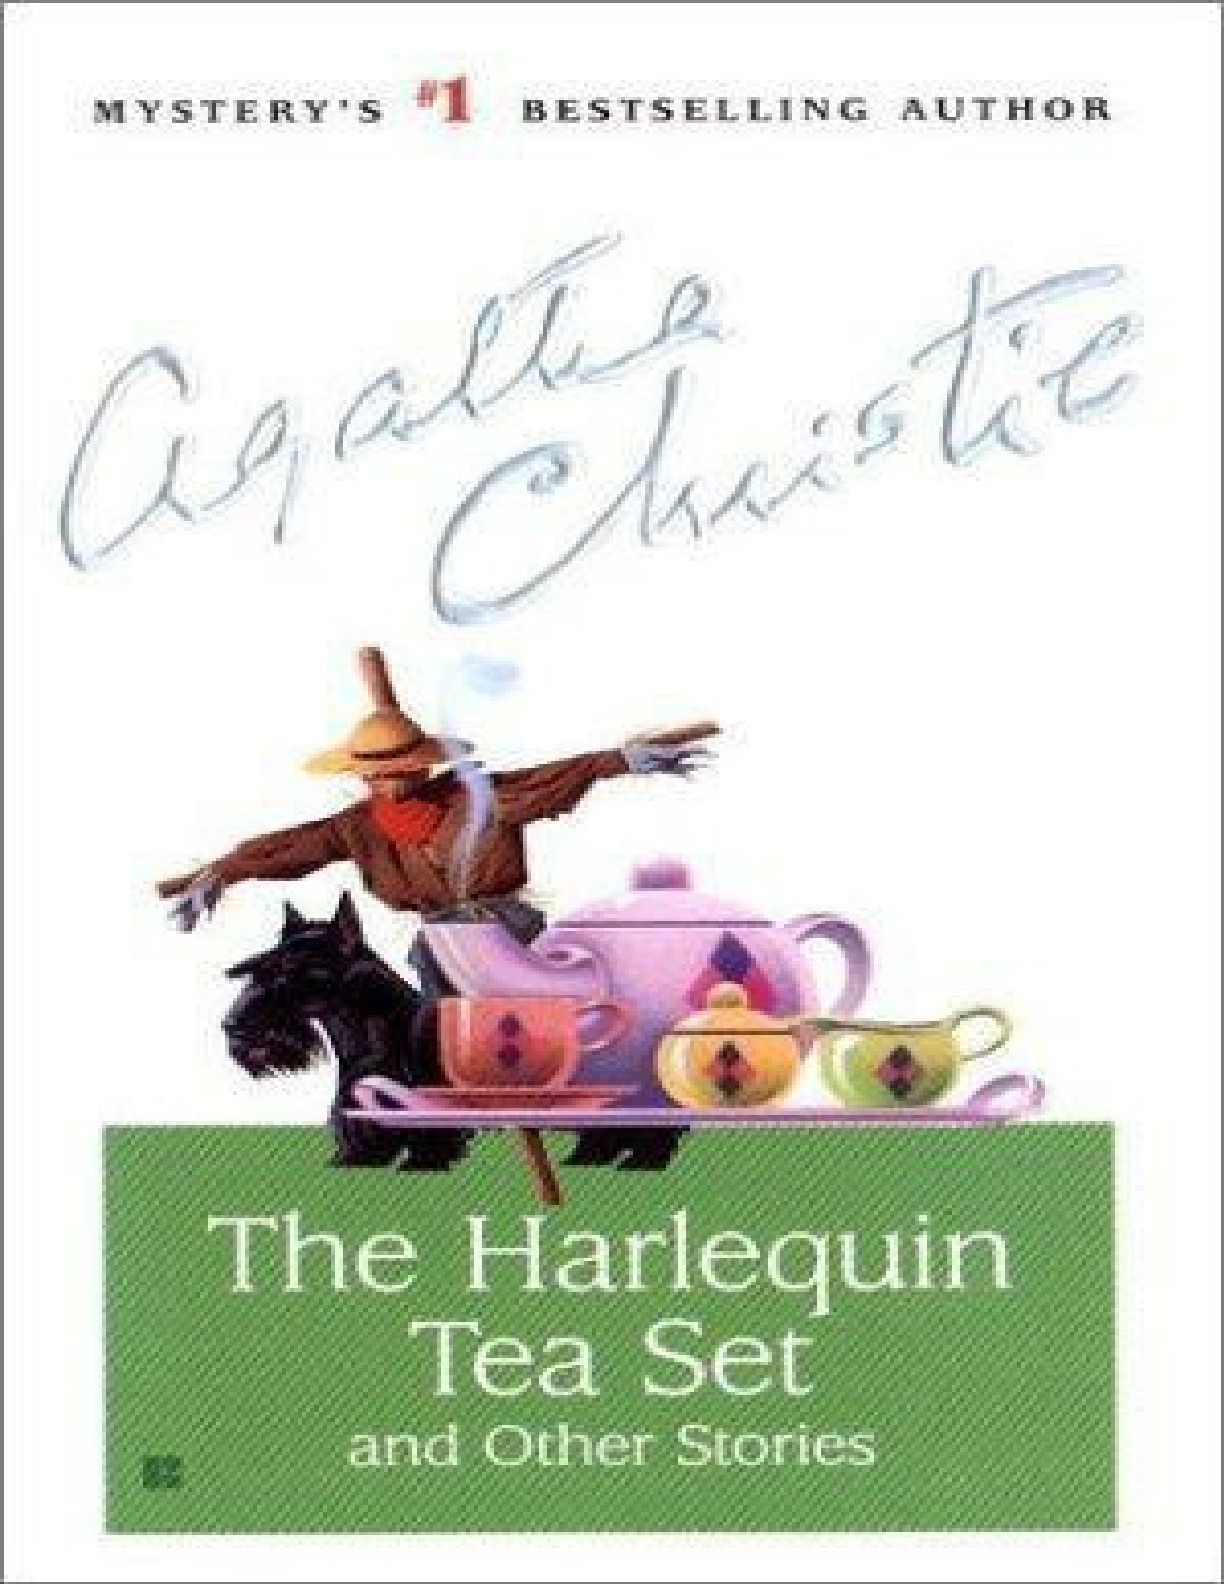 Harlequin Tea Set and Other Stories, The – Agatha Christie